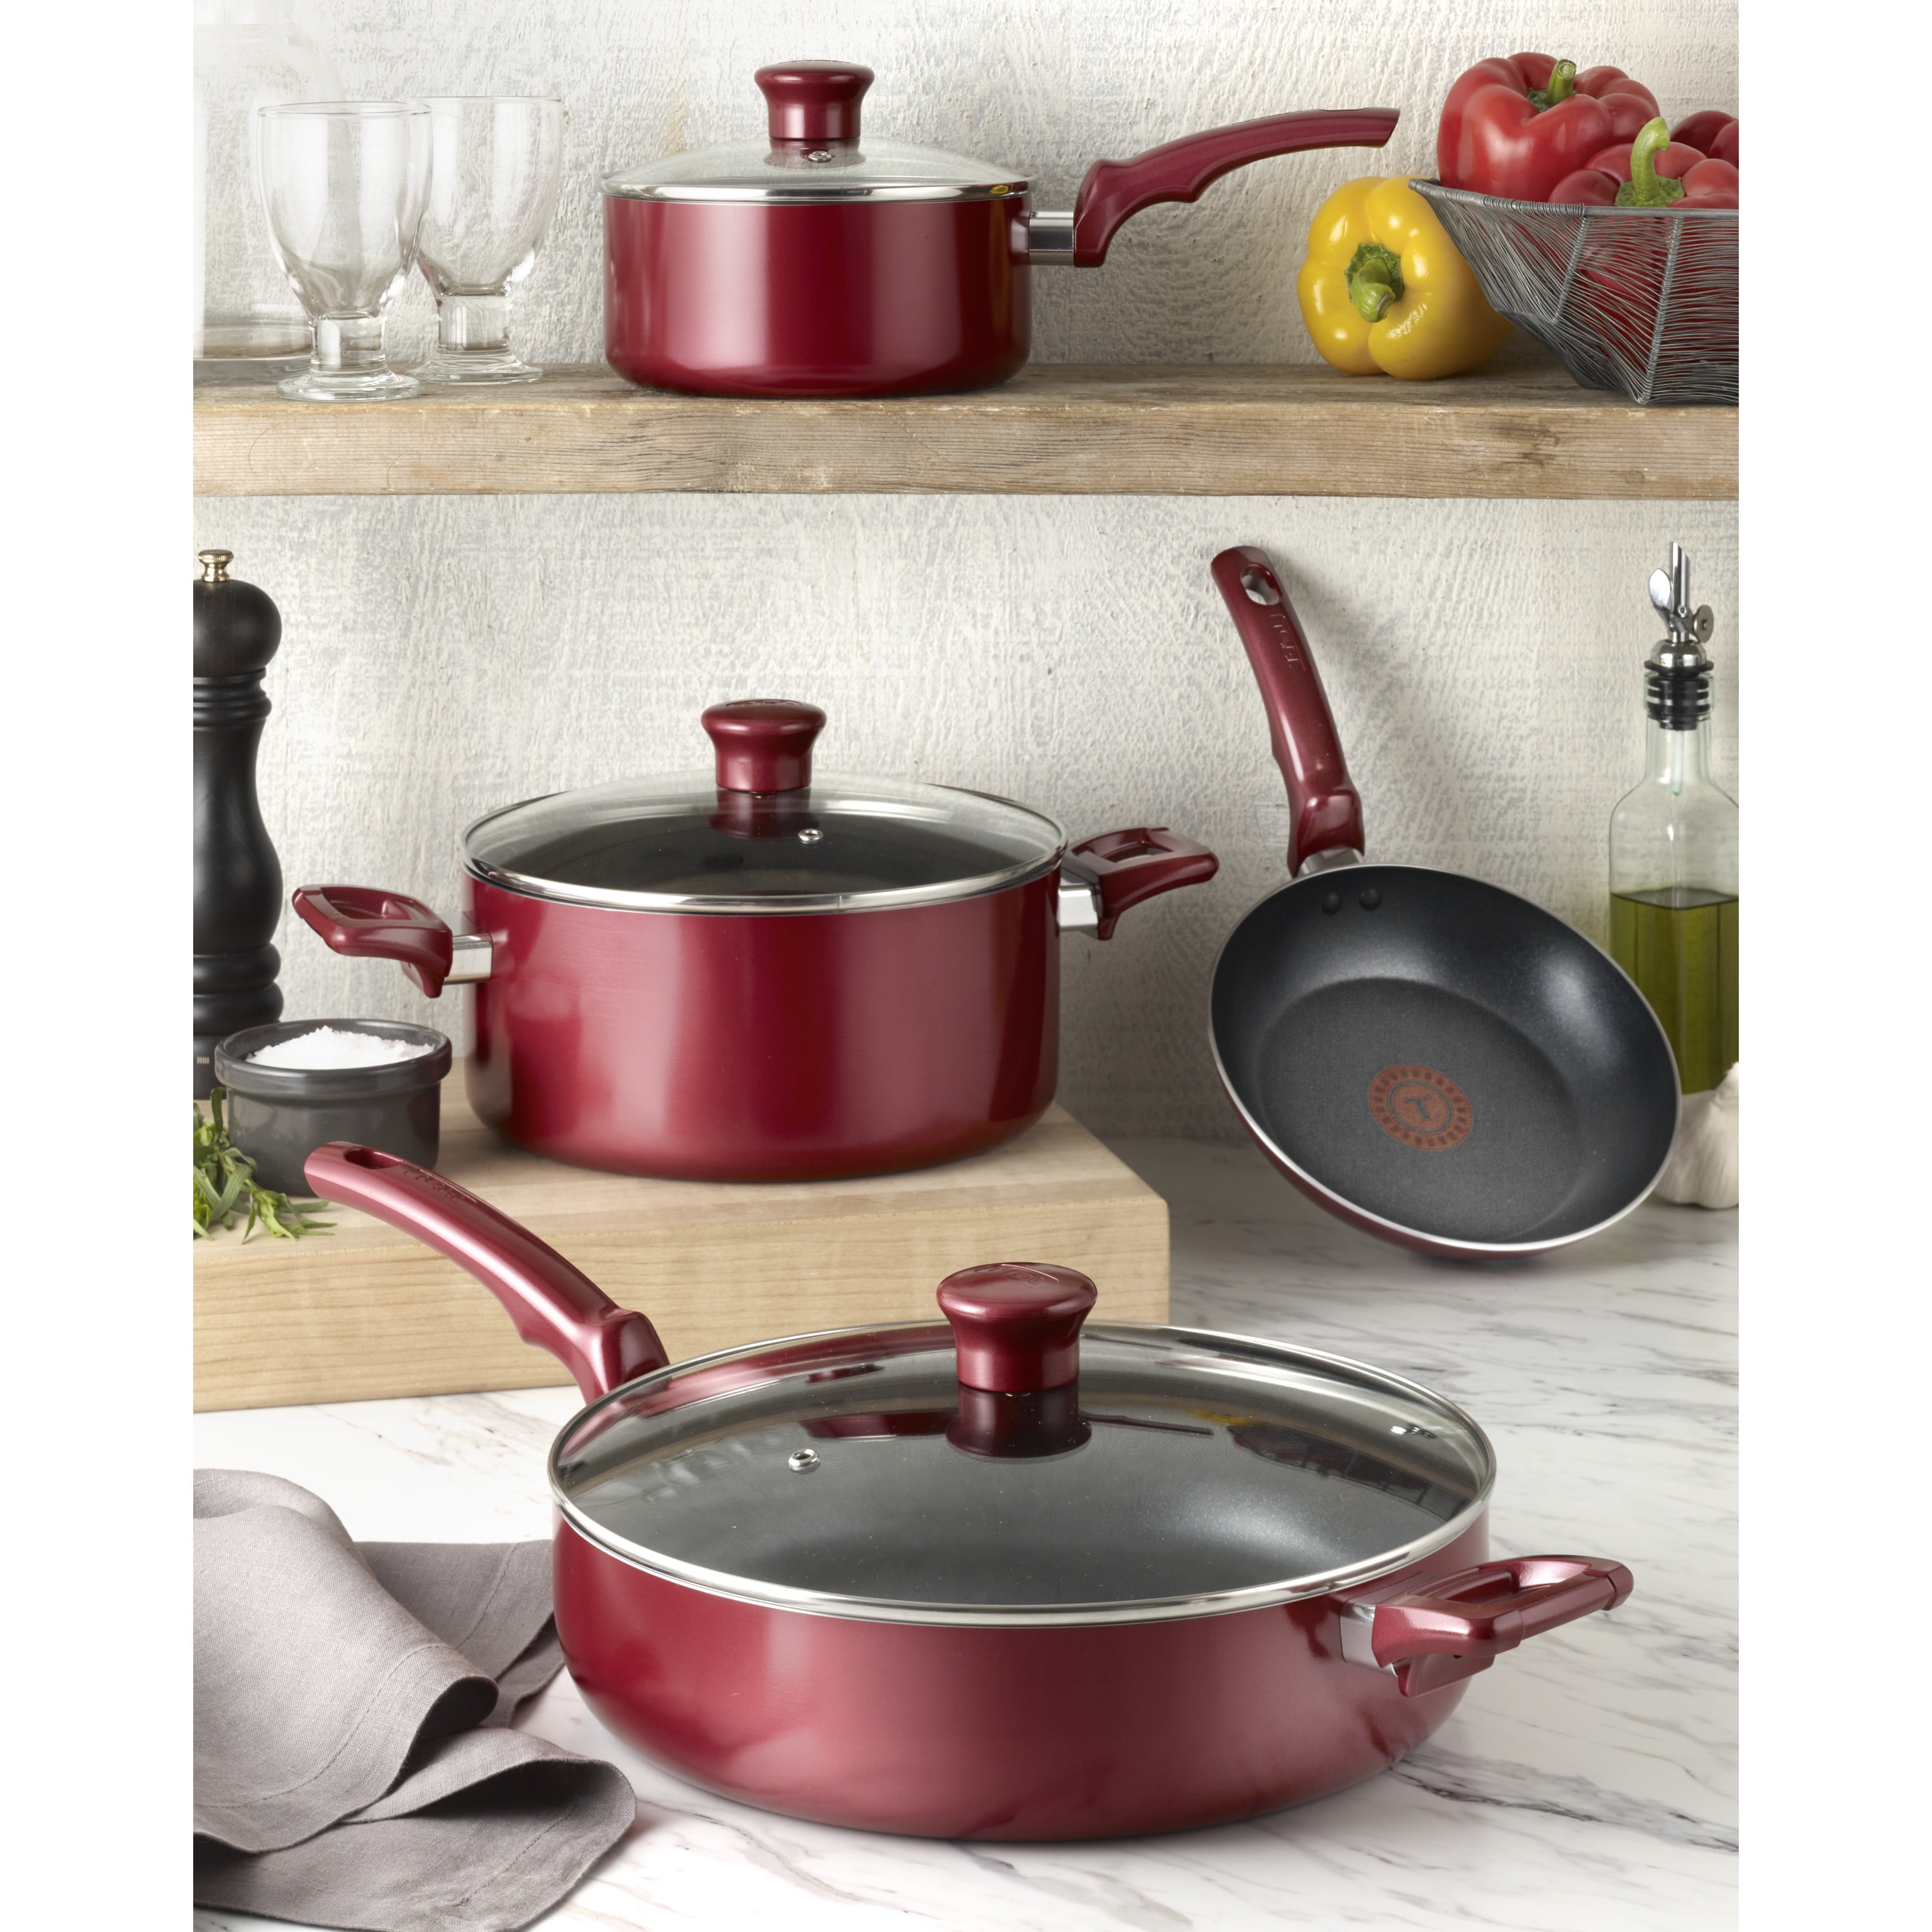 T-FAL T-fal Ingenio The Genius Cooking System, Platinum Non-Stick, 14 Pc  Cookware Set, Cherry Red L818SE74